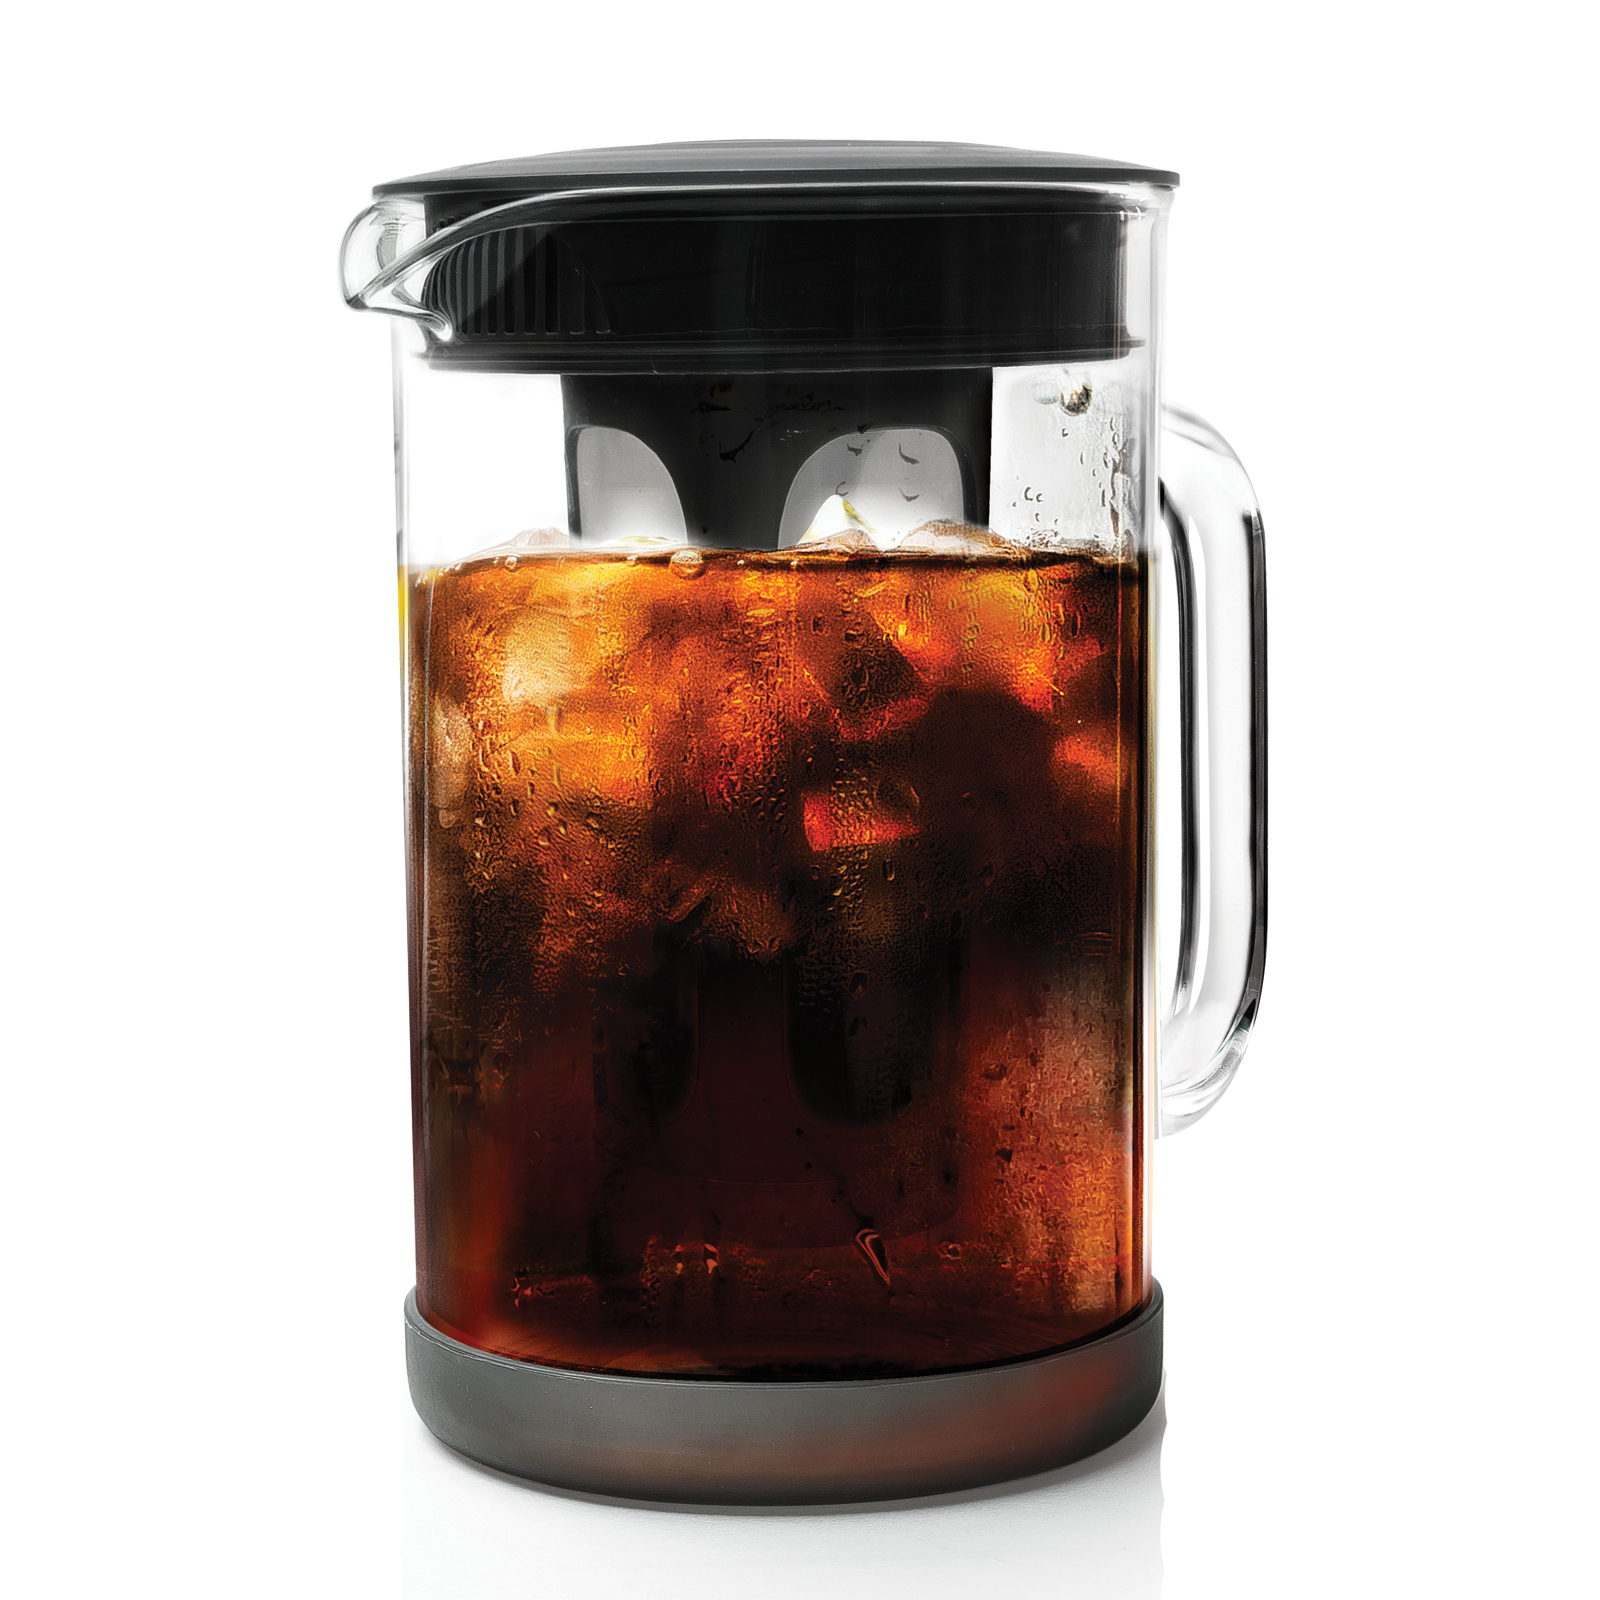 iced coffee maker bed bath and beyond